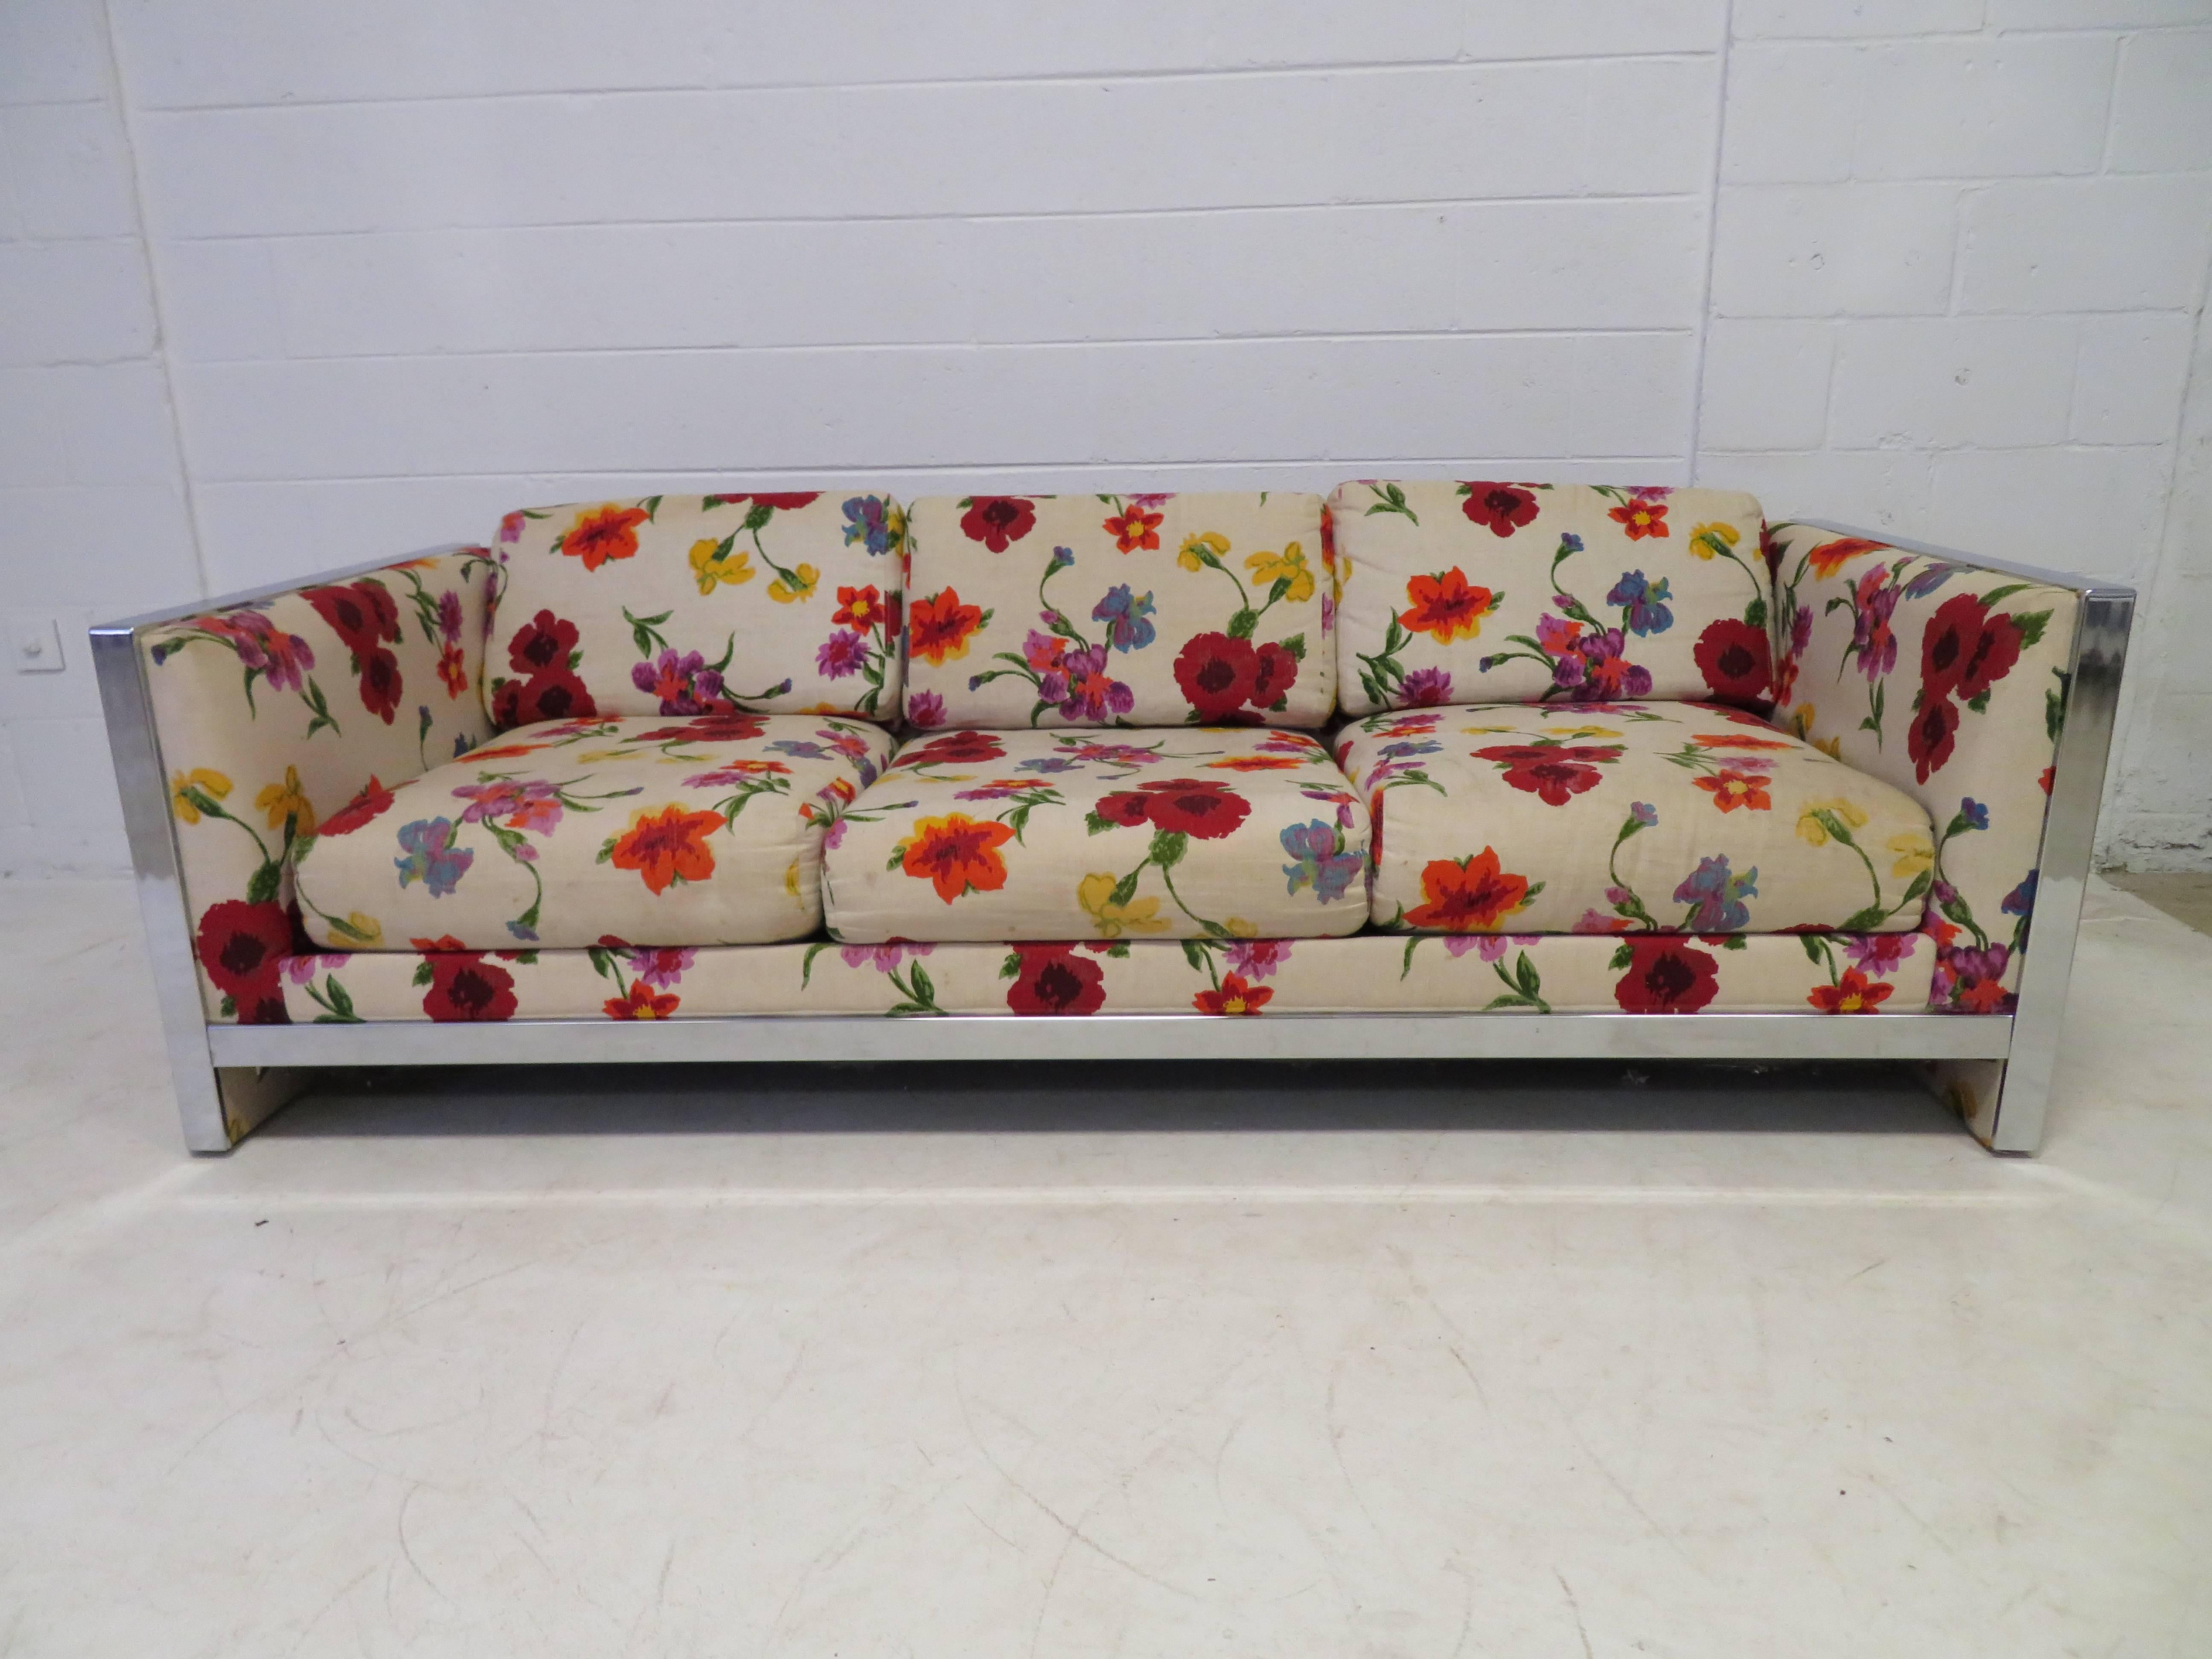 Lovely Milo Baughman style chunky chrome Mid-Century Modern sofa. Looks like the sofa was reupholstered in the 1980s with a wonderful floral linen in nice vintage condition-minor wear. We have the matching loveseat listed in another of our 1stdibs